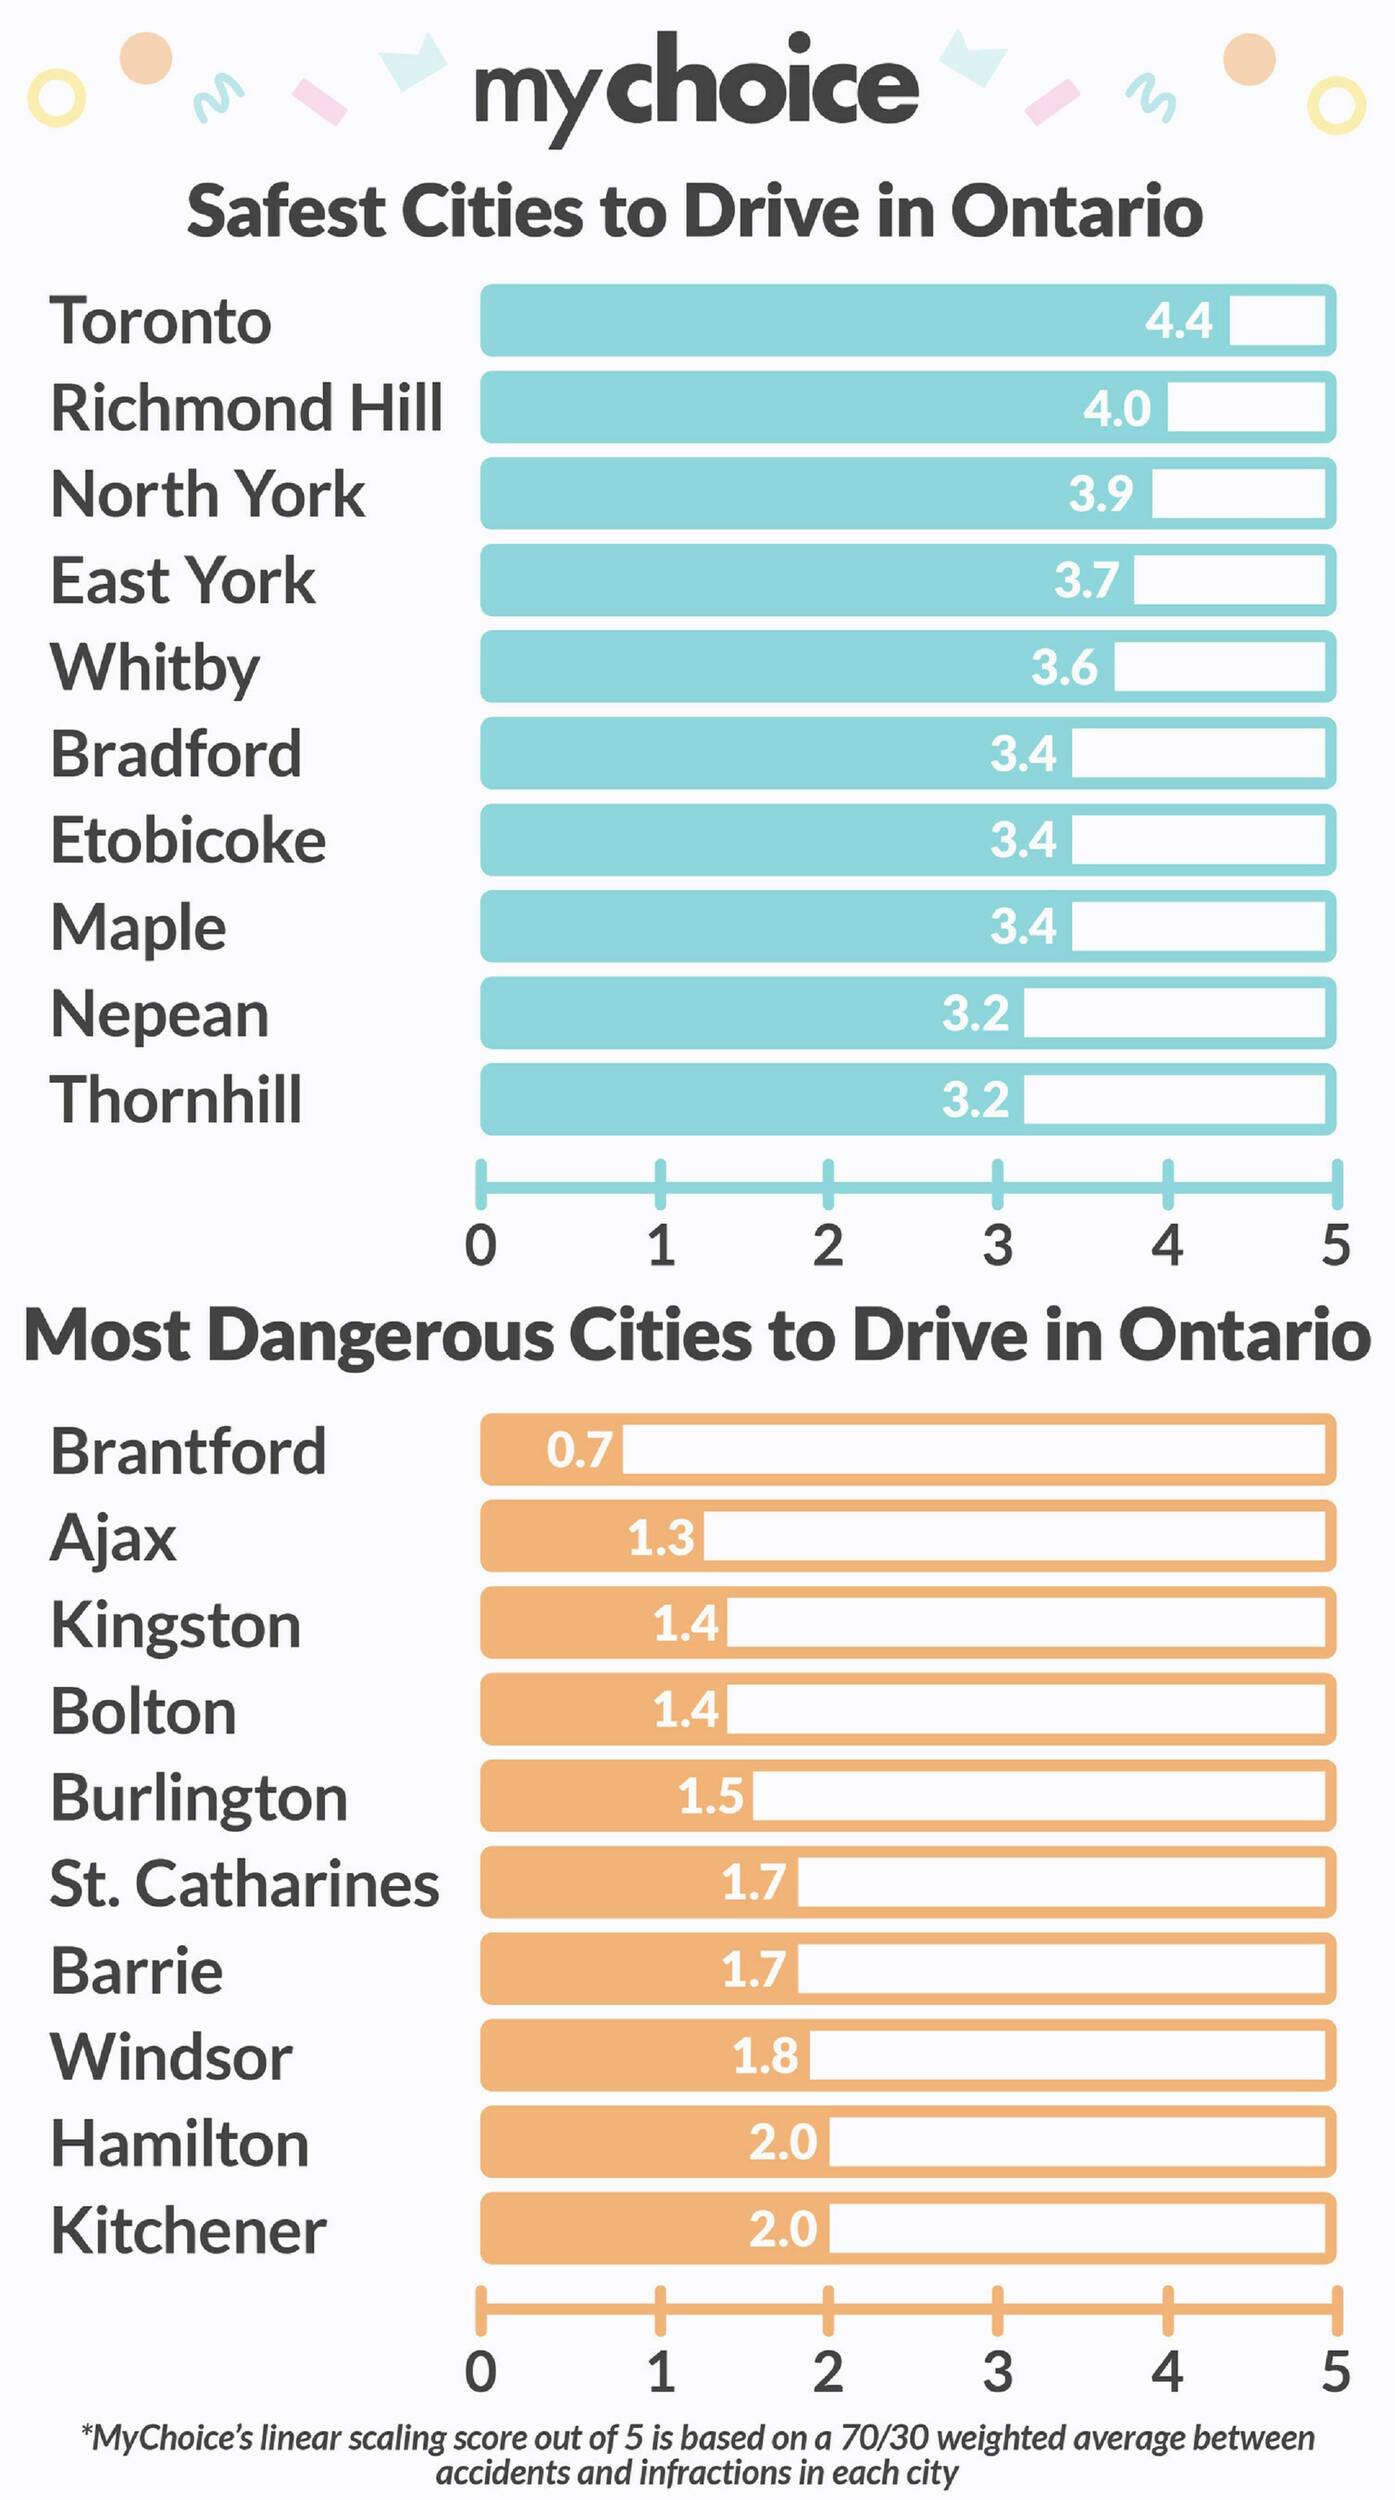 These are the 10 most dangerous cities to drive in Ontario